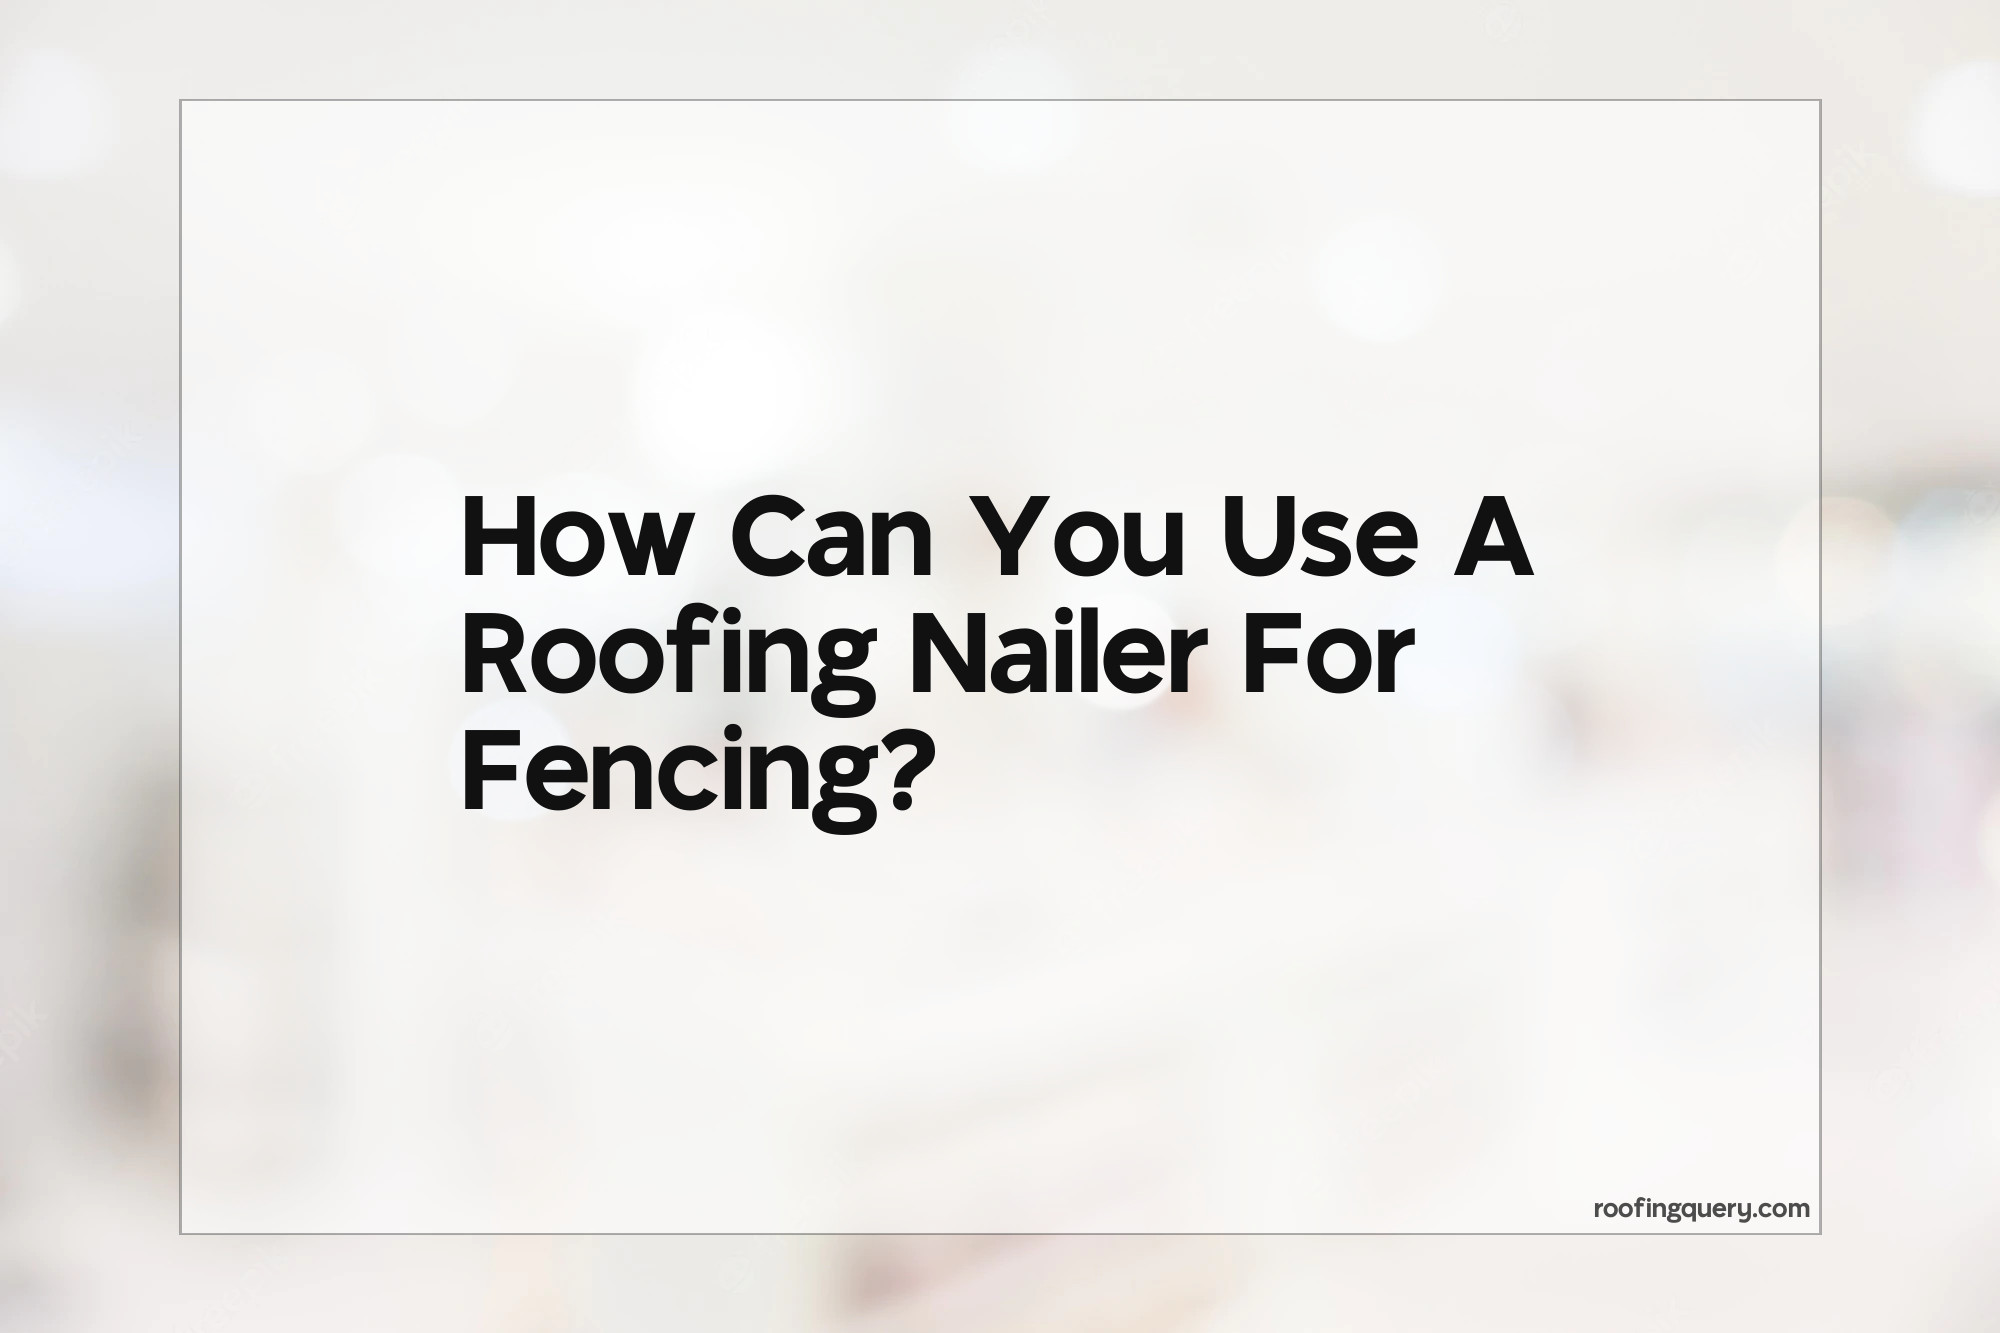 Can You Use A Roofing Nailer For Fencing